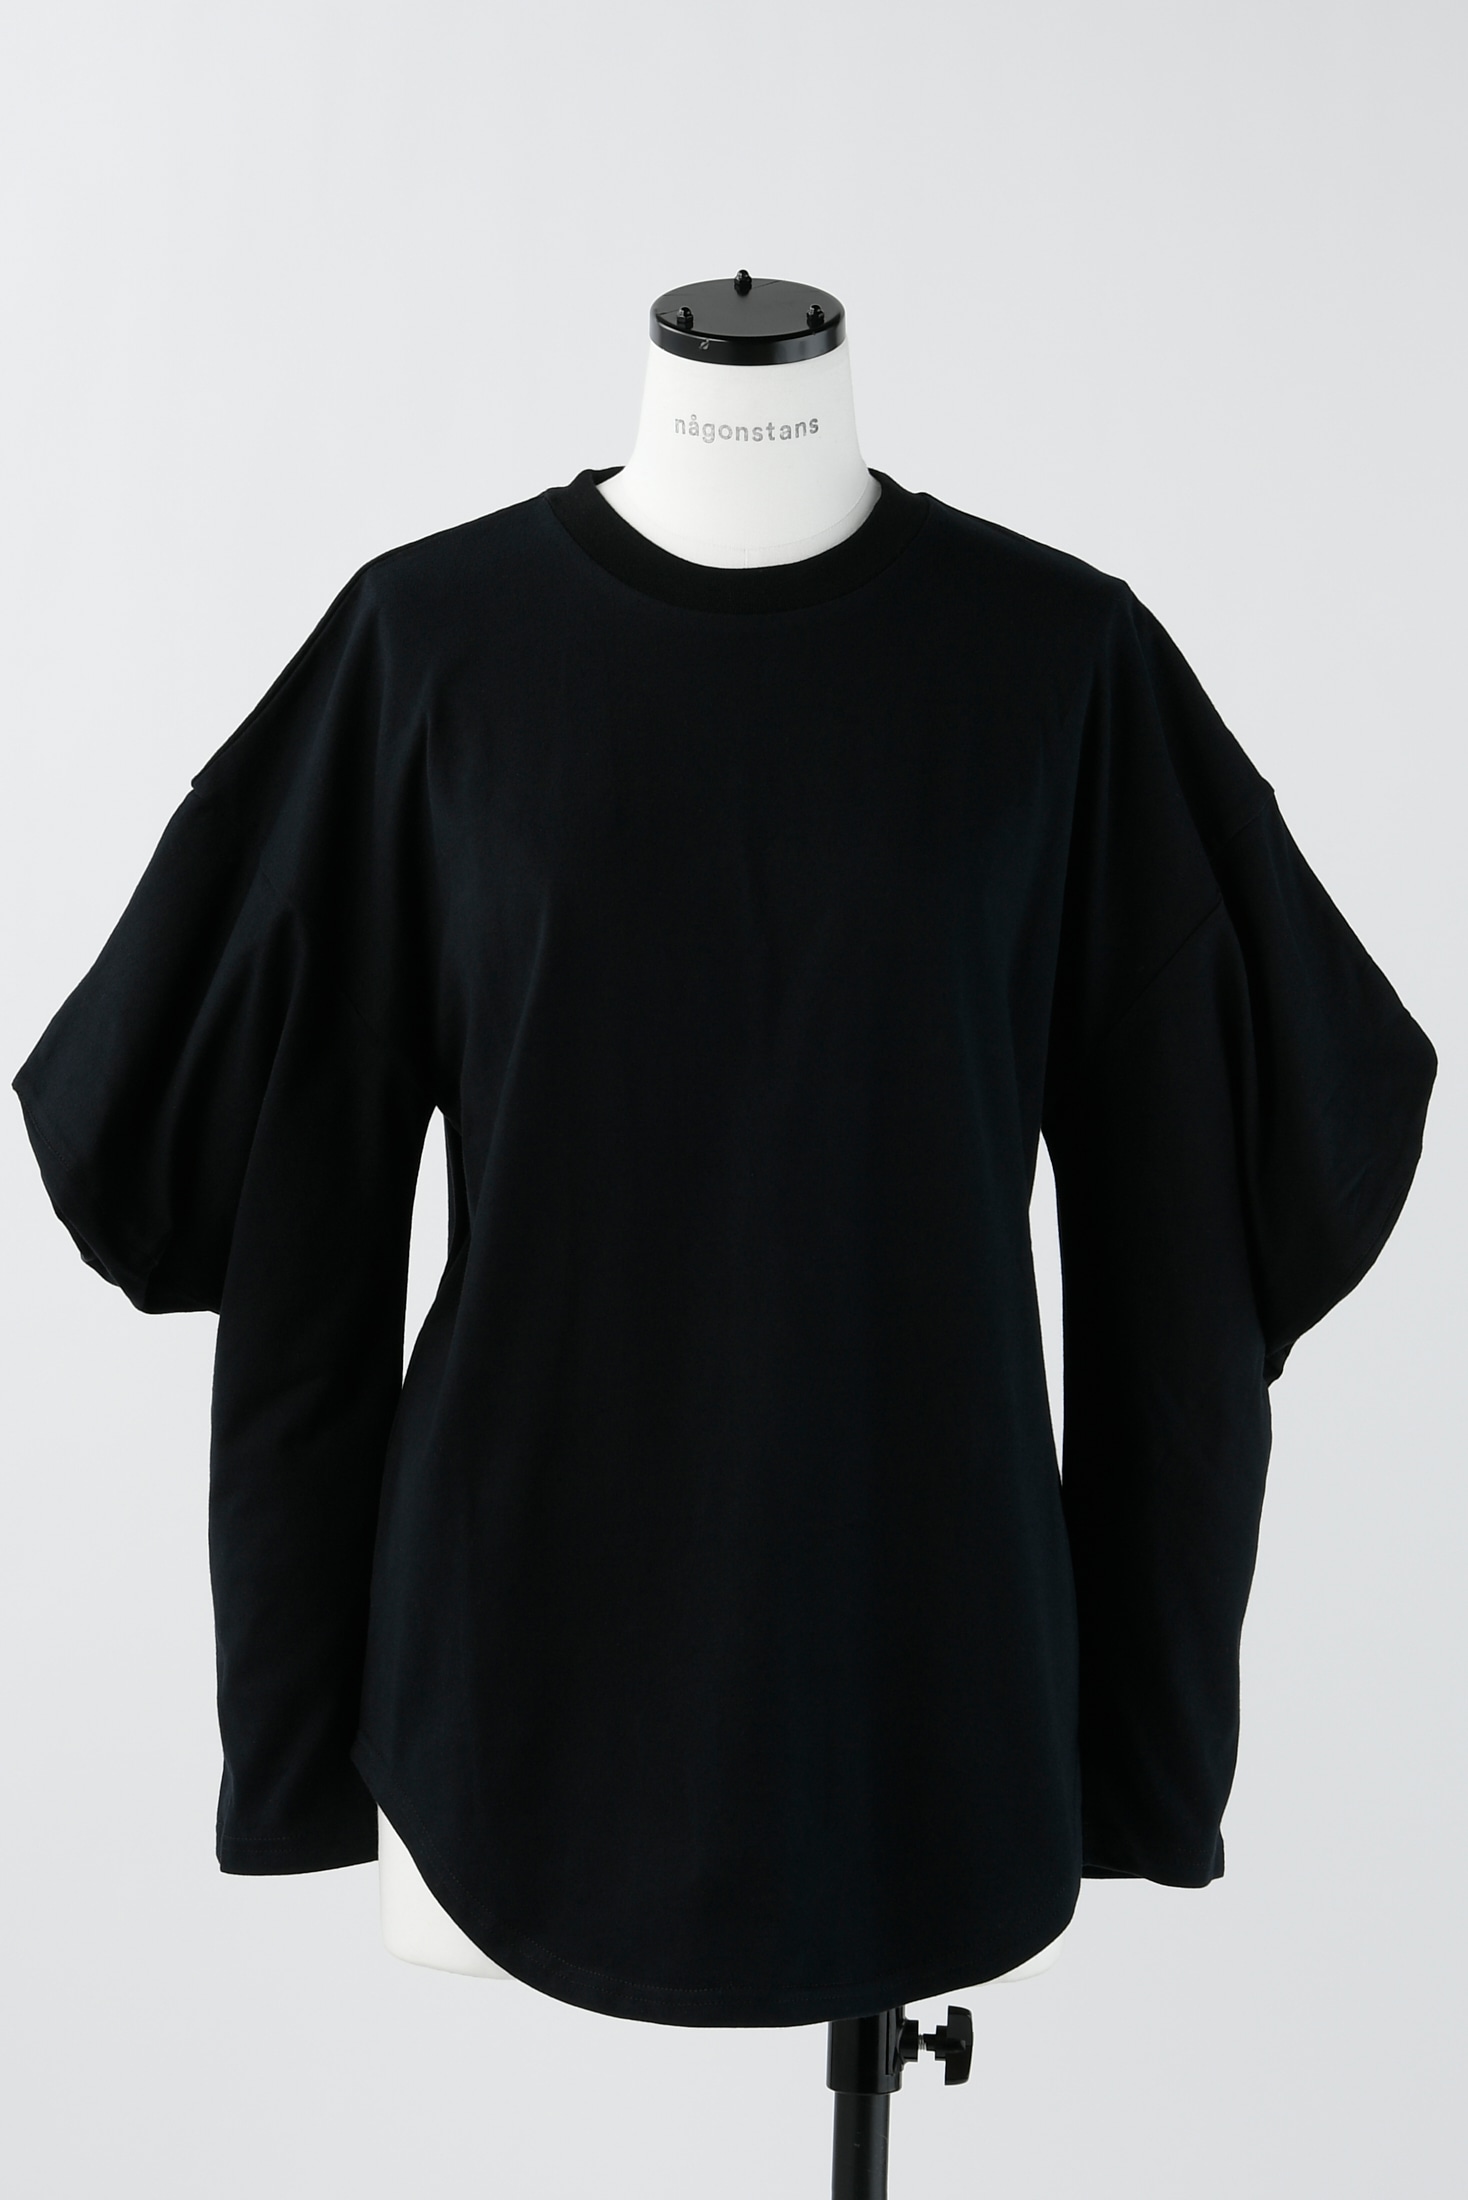 clione long-sleeves